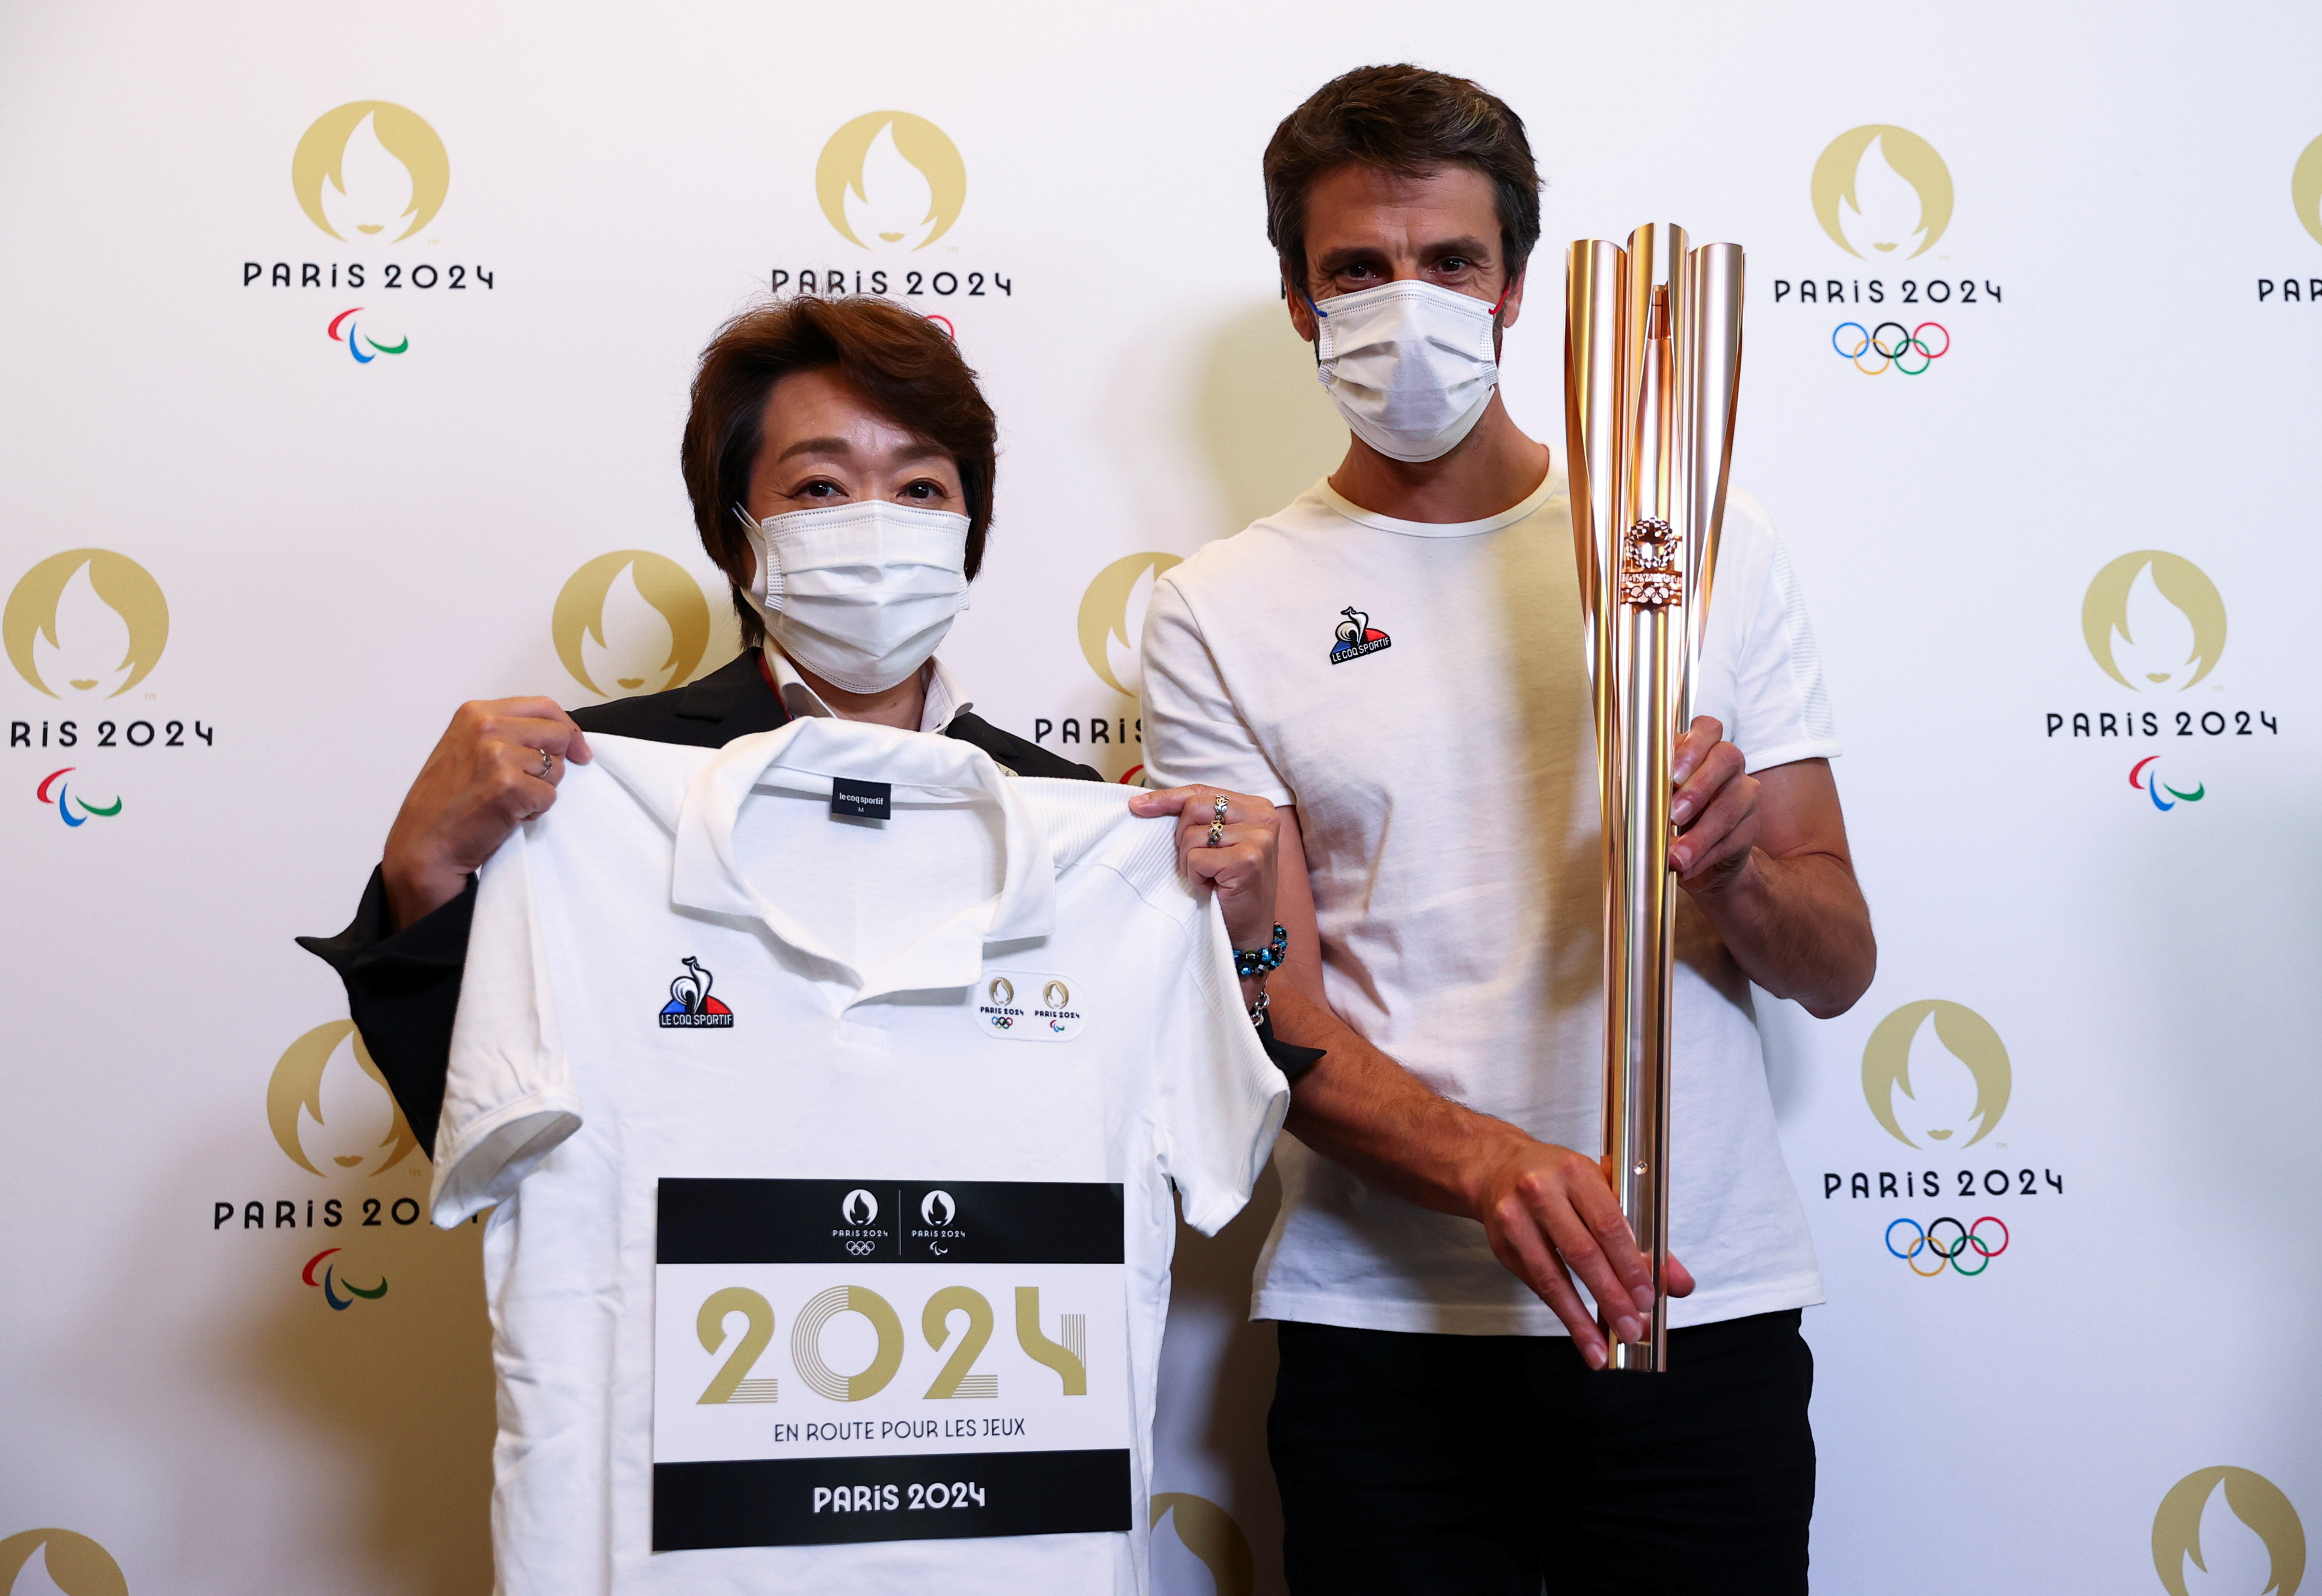 Paris 2024 announces two new sponsors for Olympic and Paralympic Torch Relay